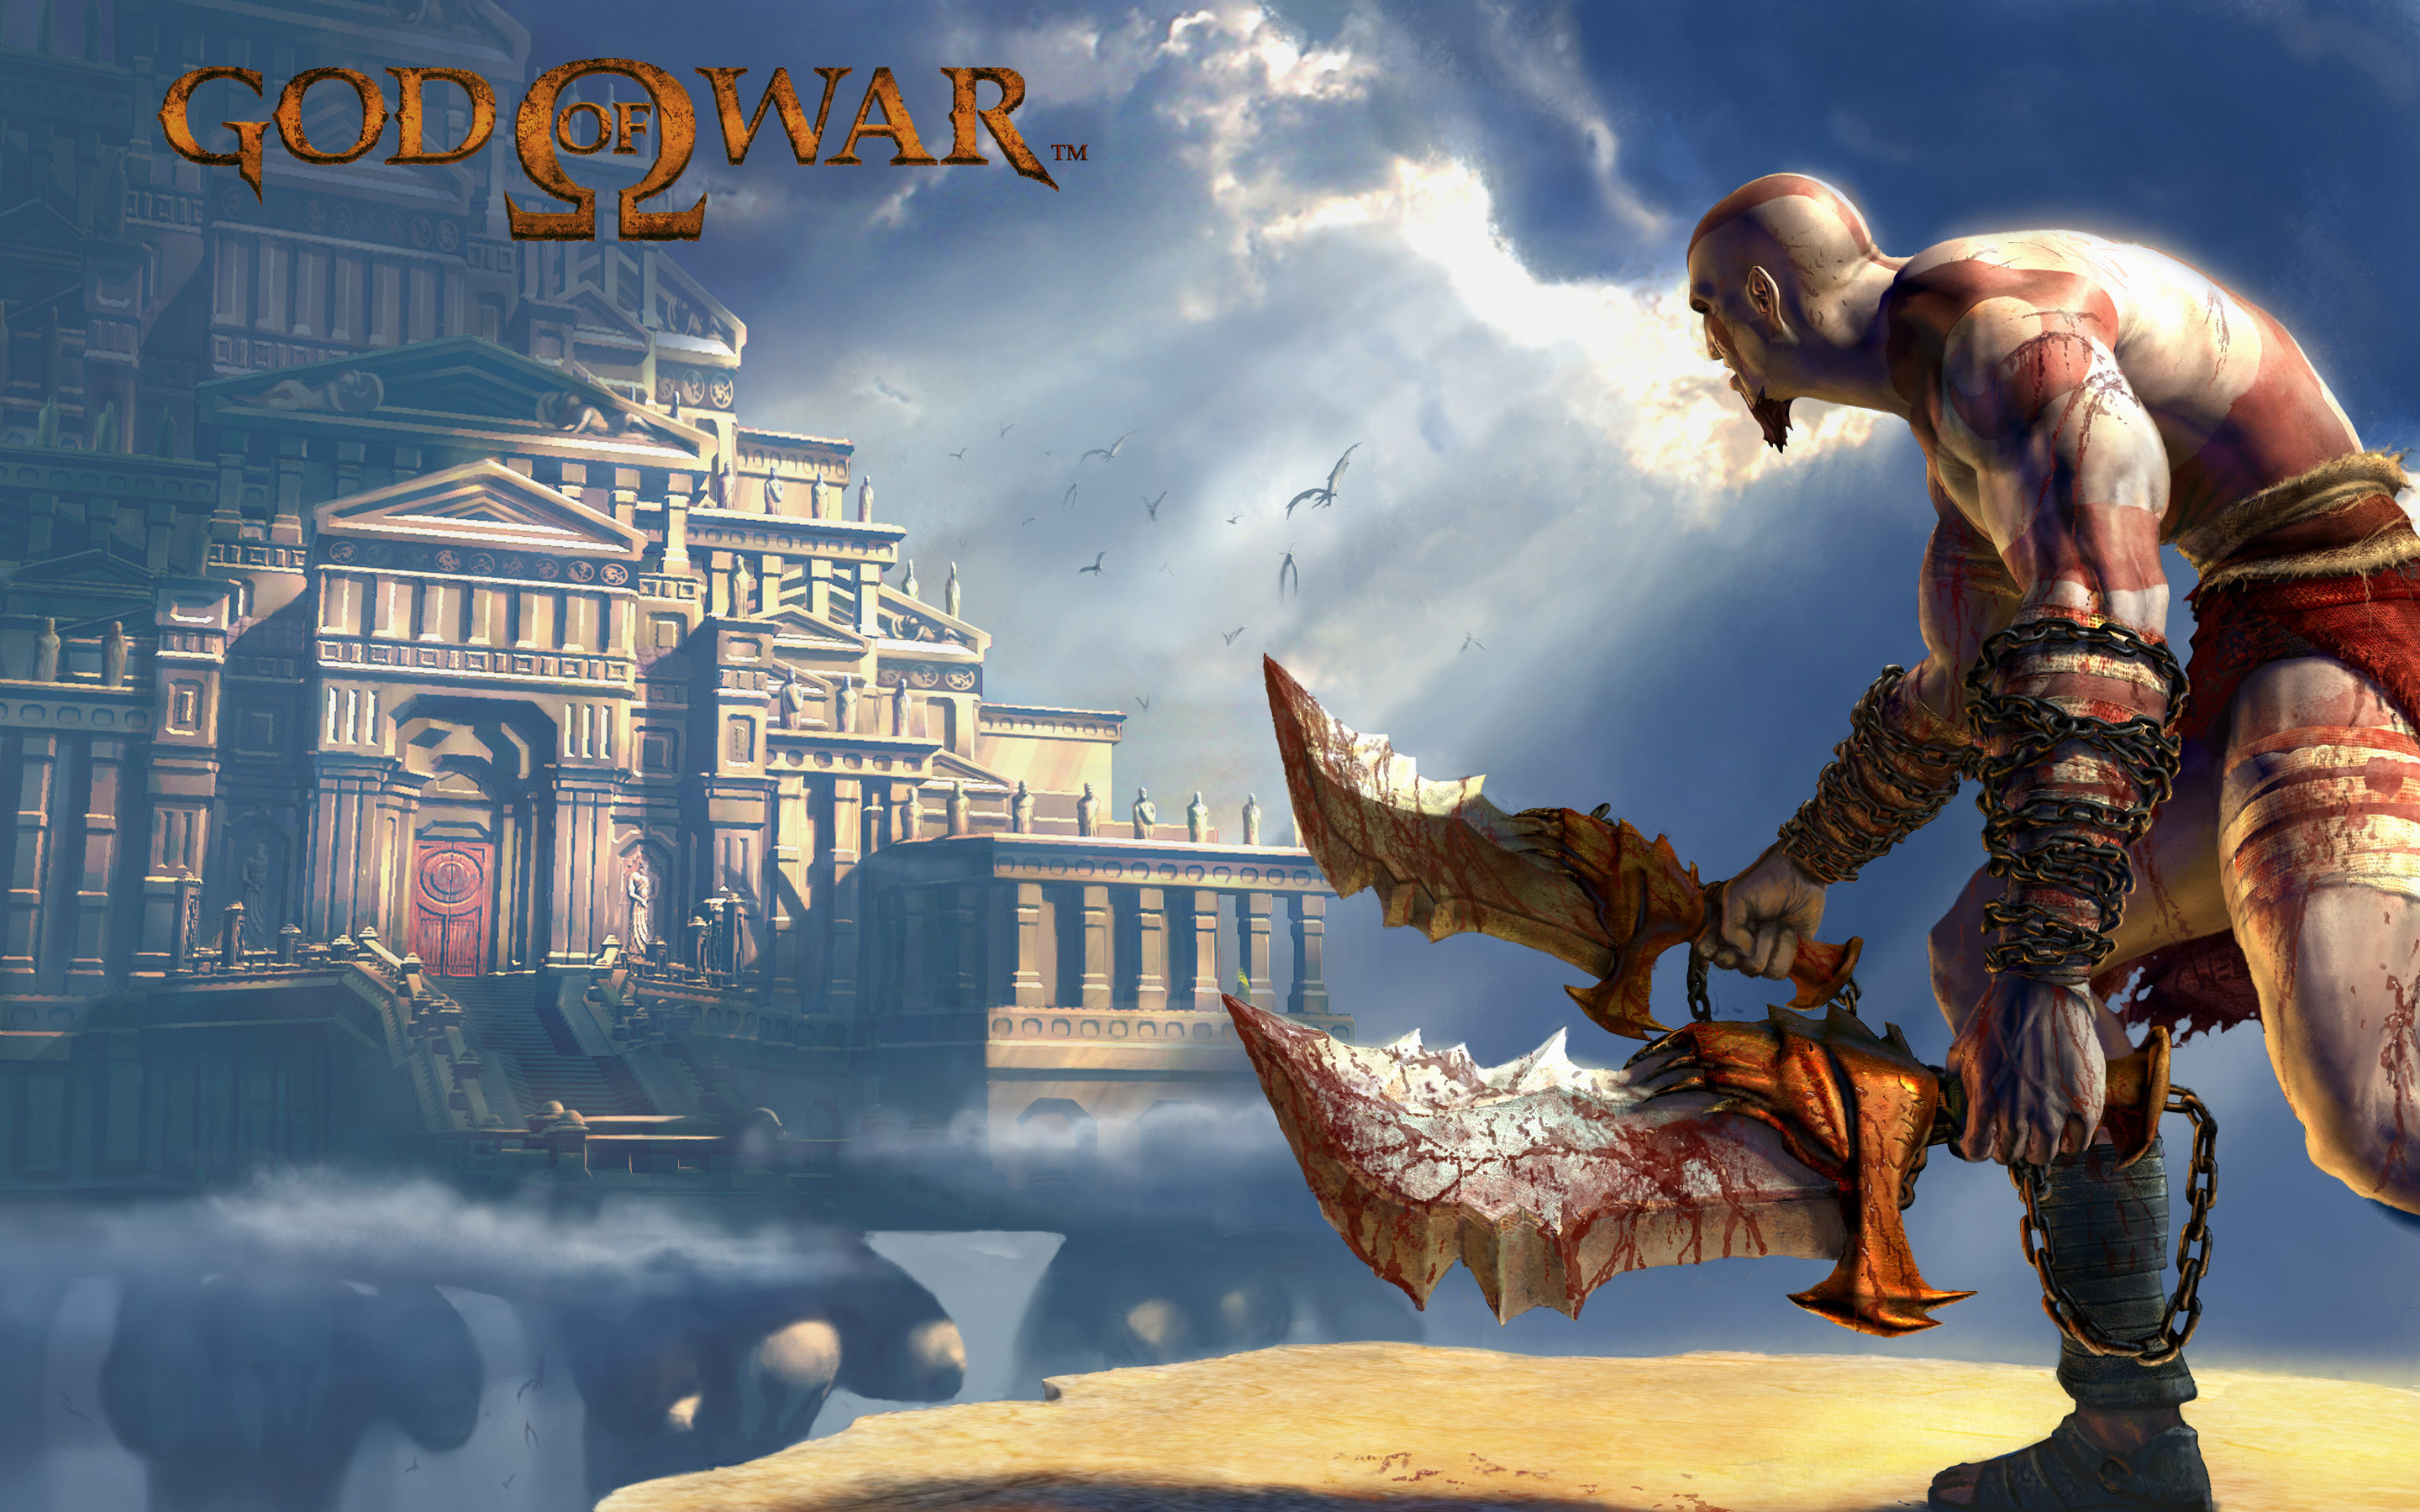 God of War 2 Game – This HD God of War 2 Game wallpaper is based